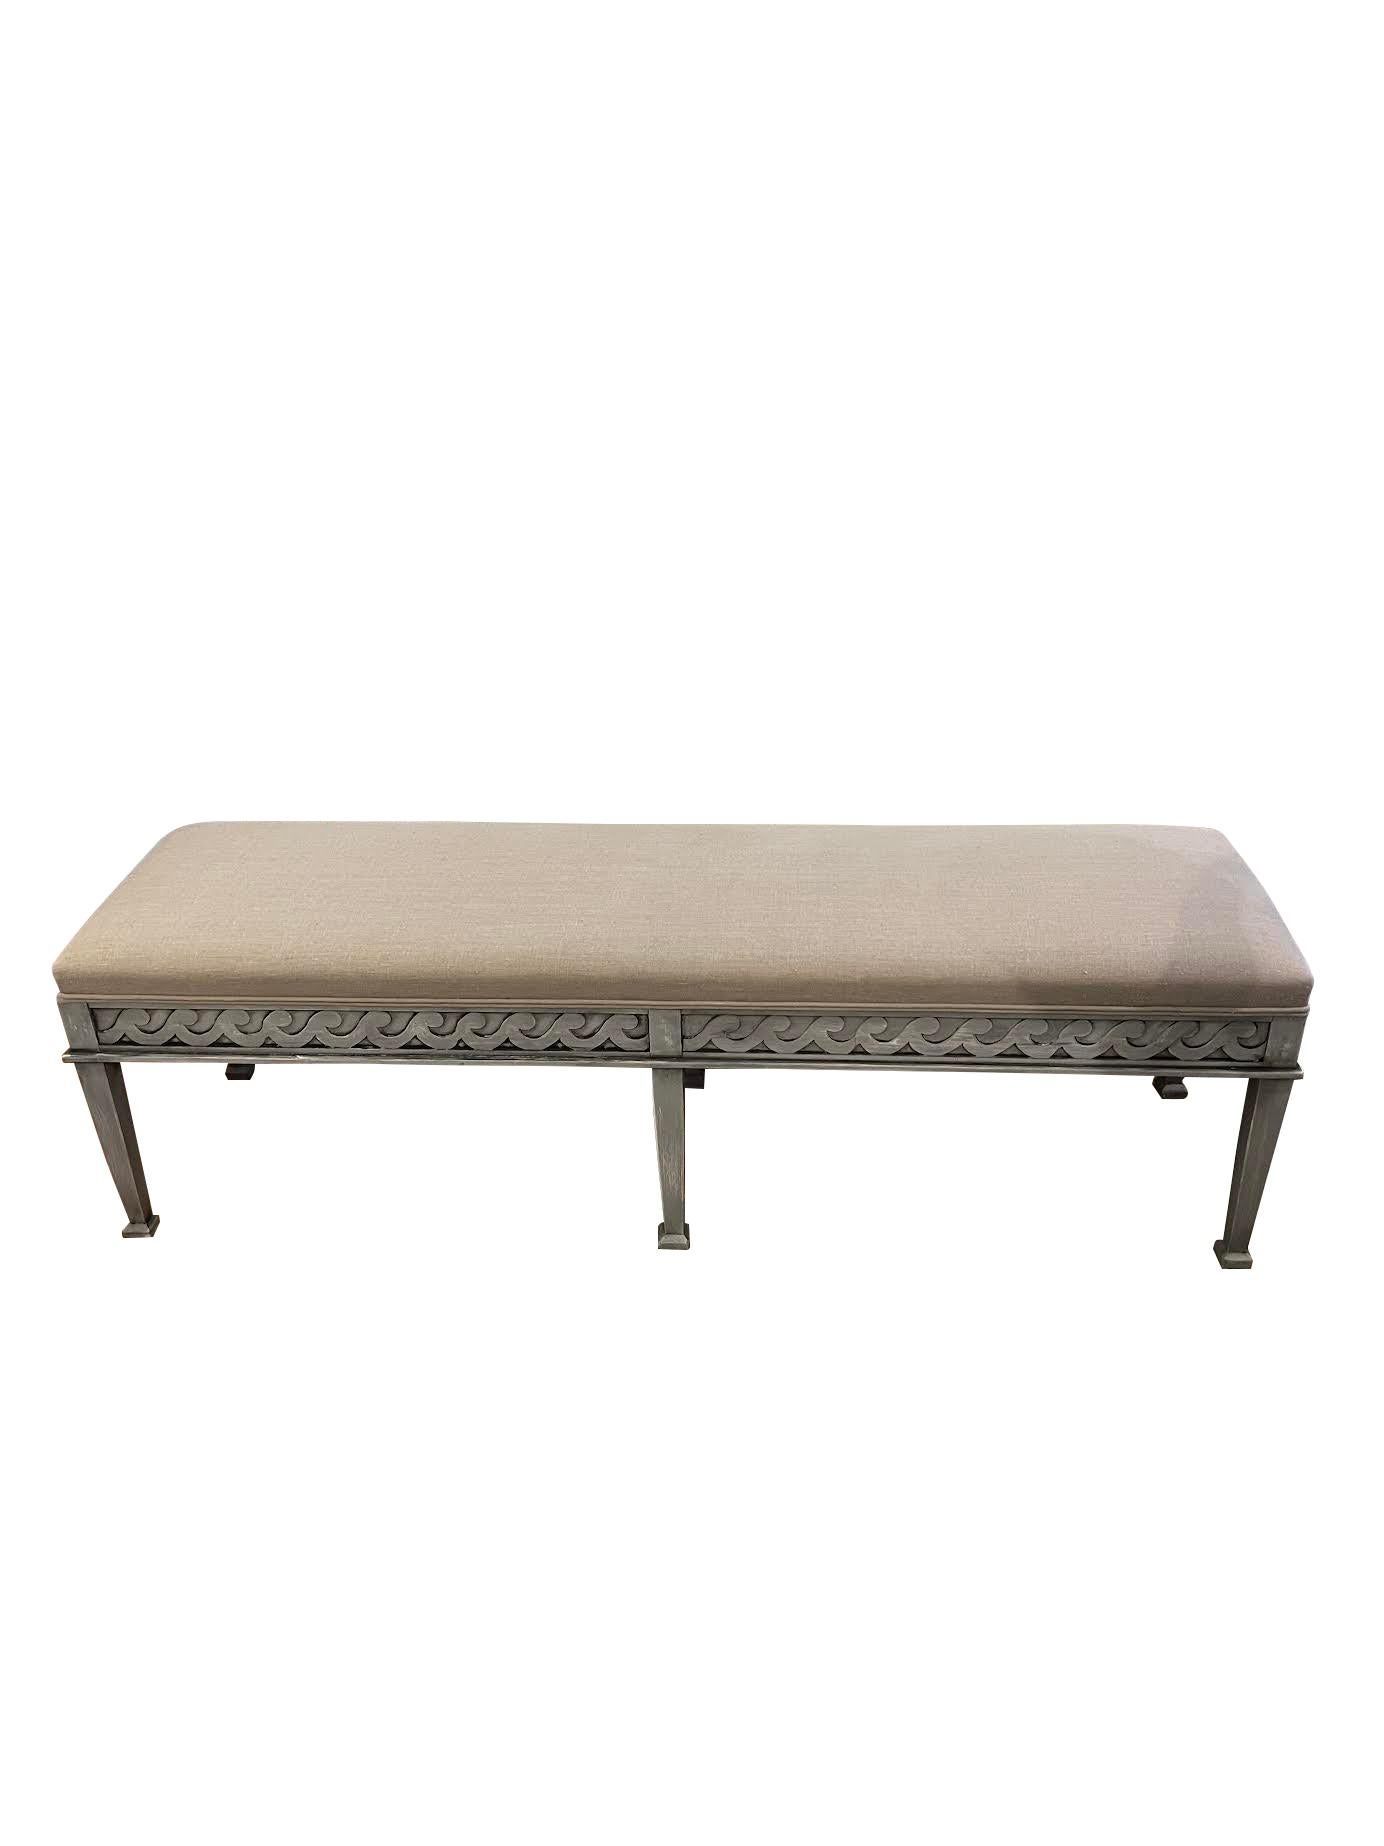 Grey Painted and Upholstered Gustavian Style Bench, England, Contemporary For Sale